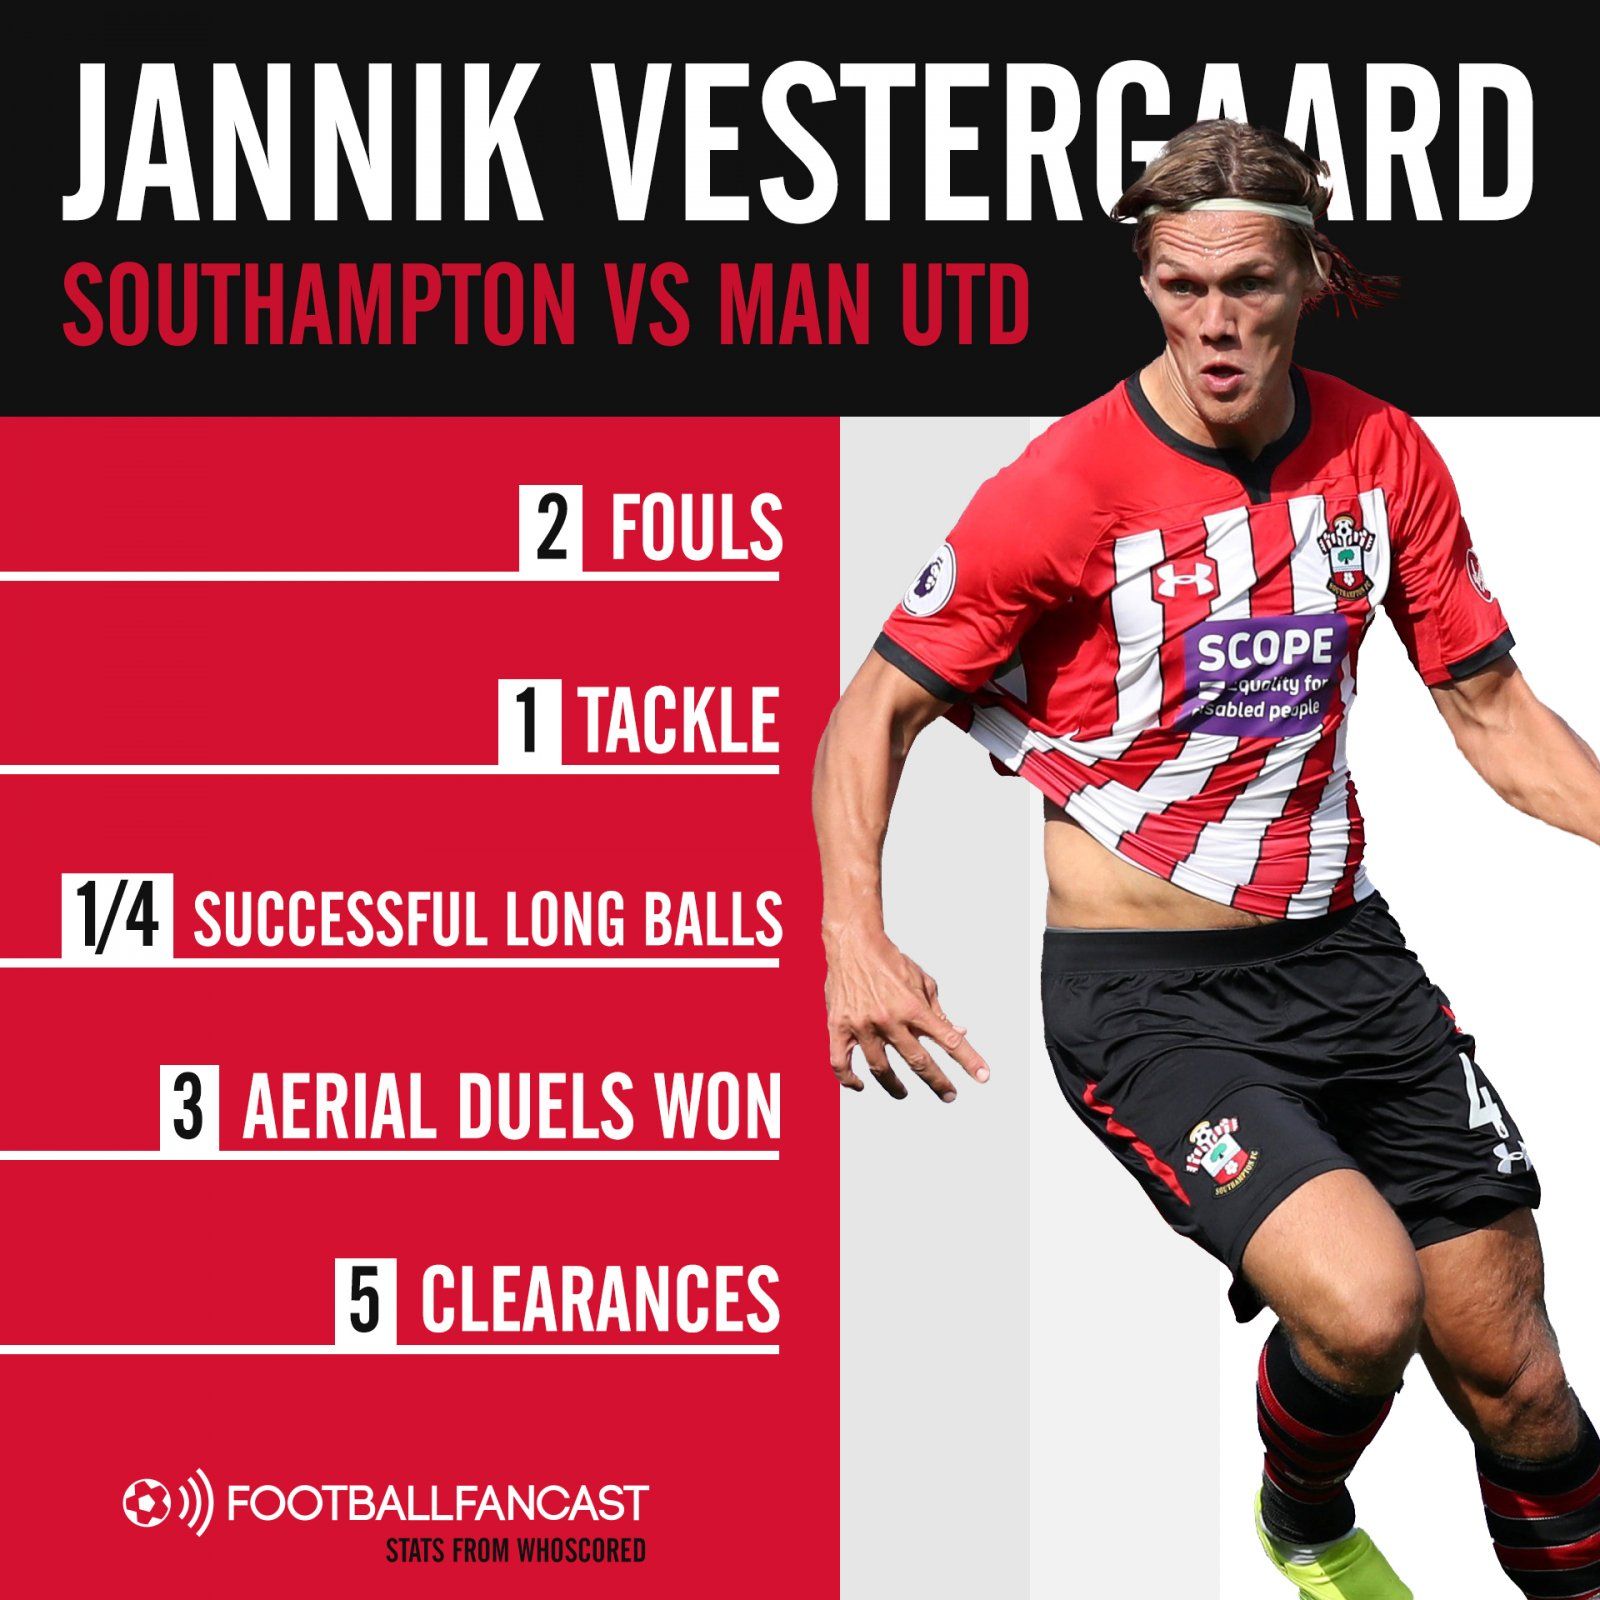 Southampton centre-back Jannik Vestergaard's stats during draw with Man United